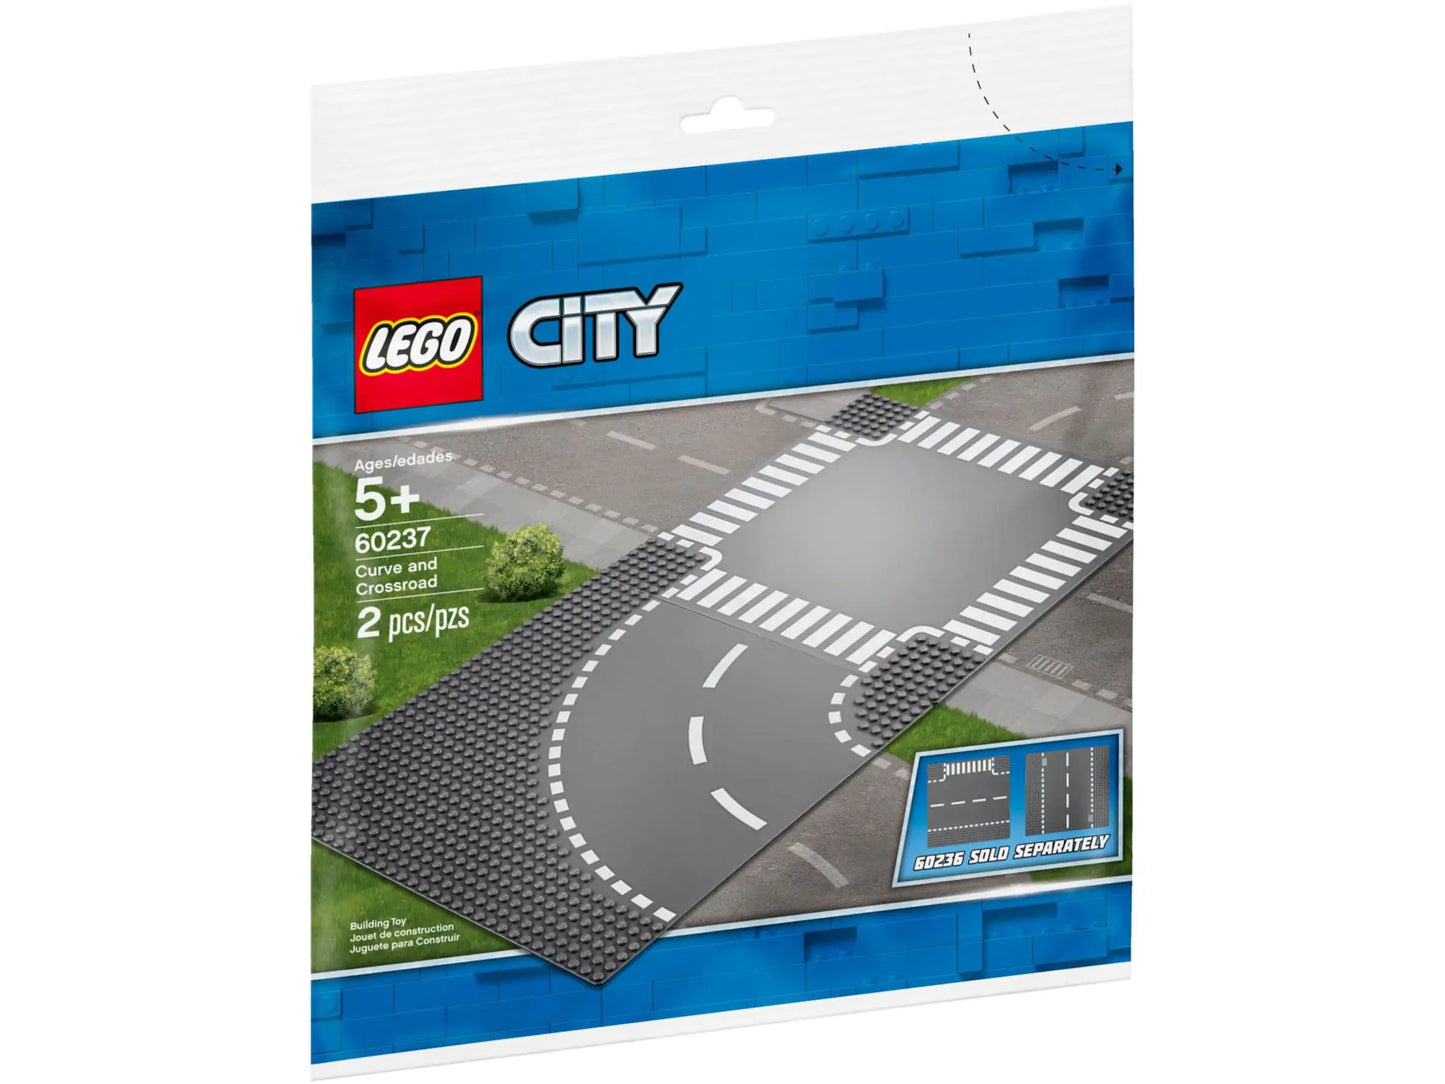 Curve and Intersection - LEGO City 